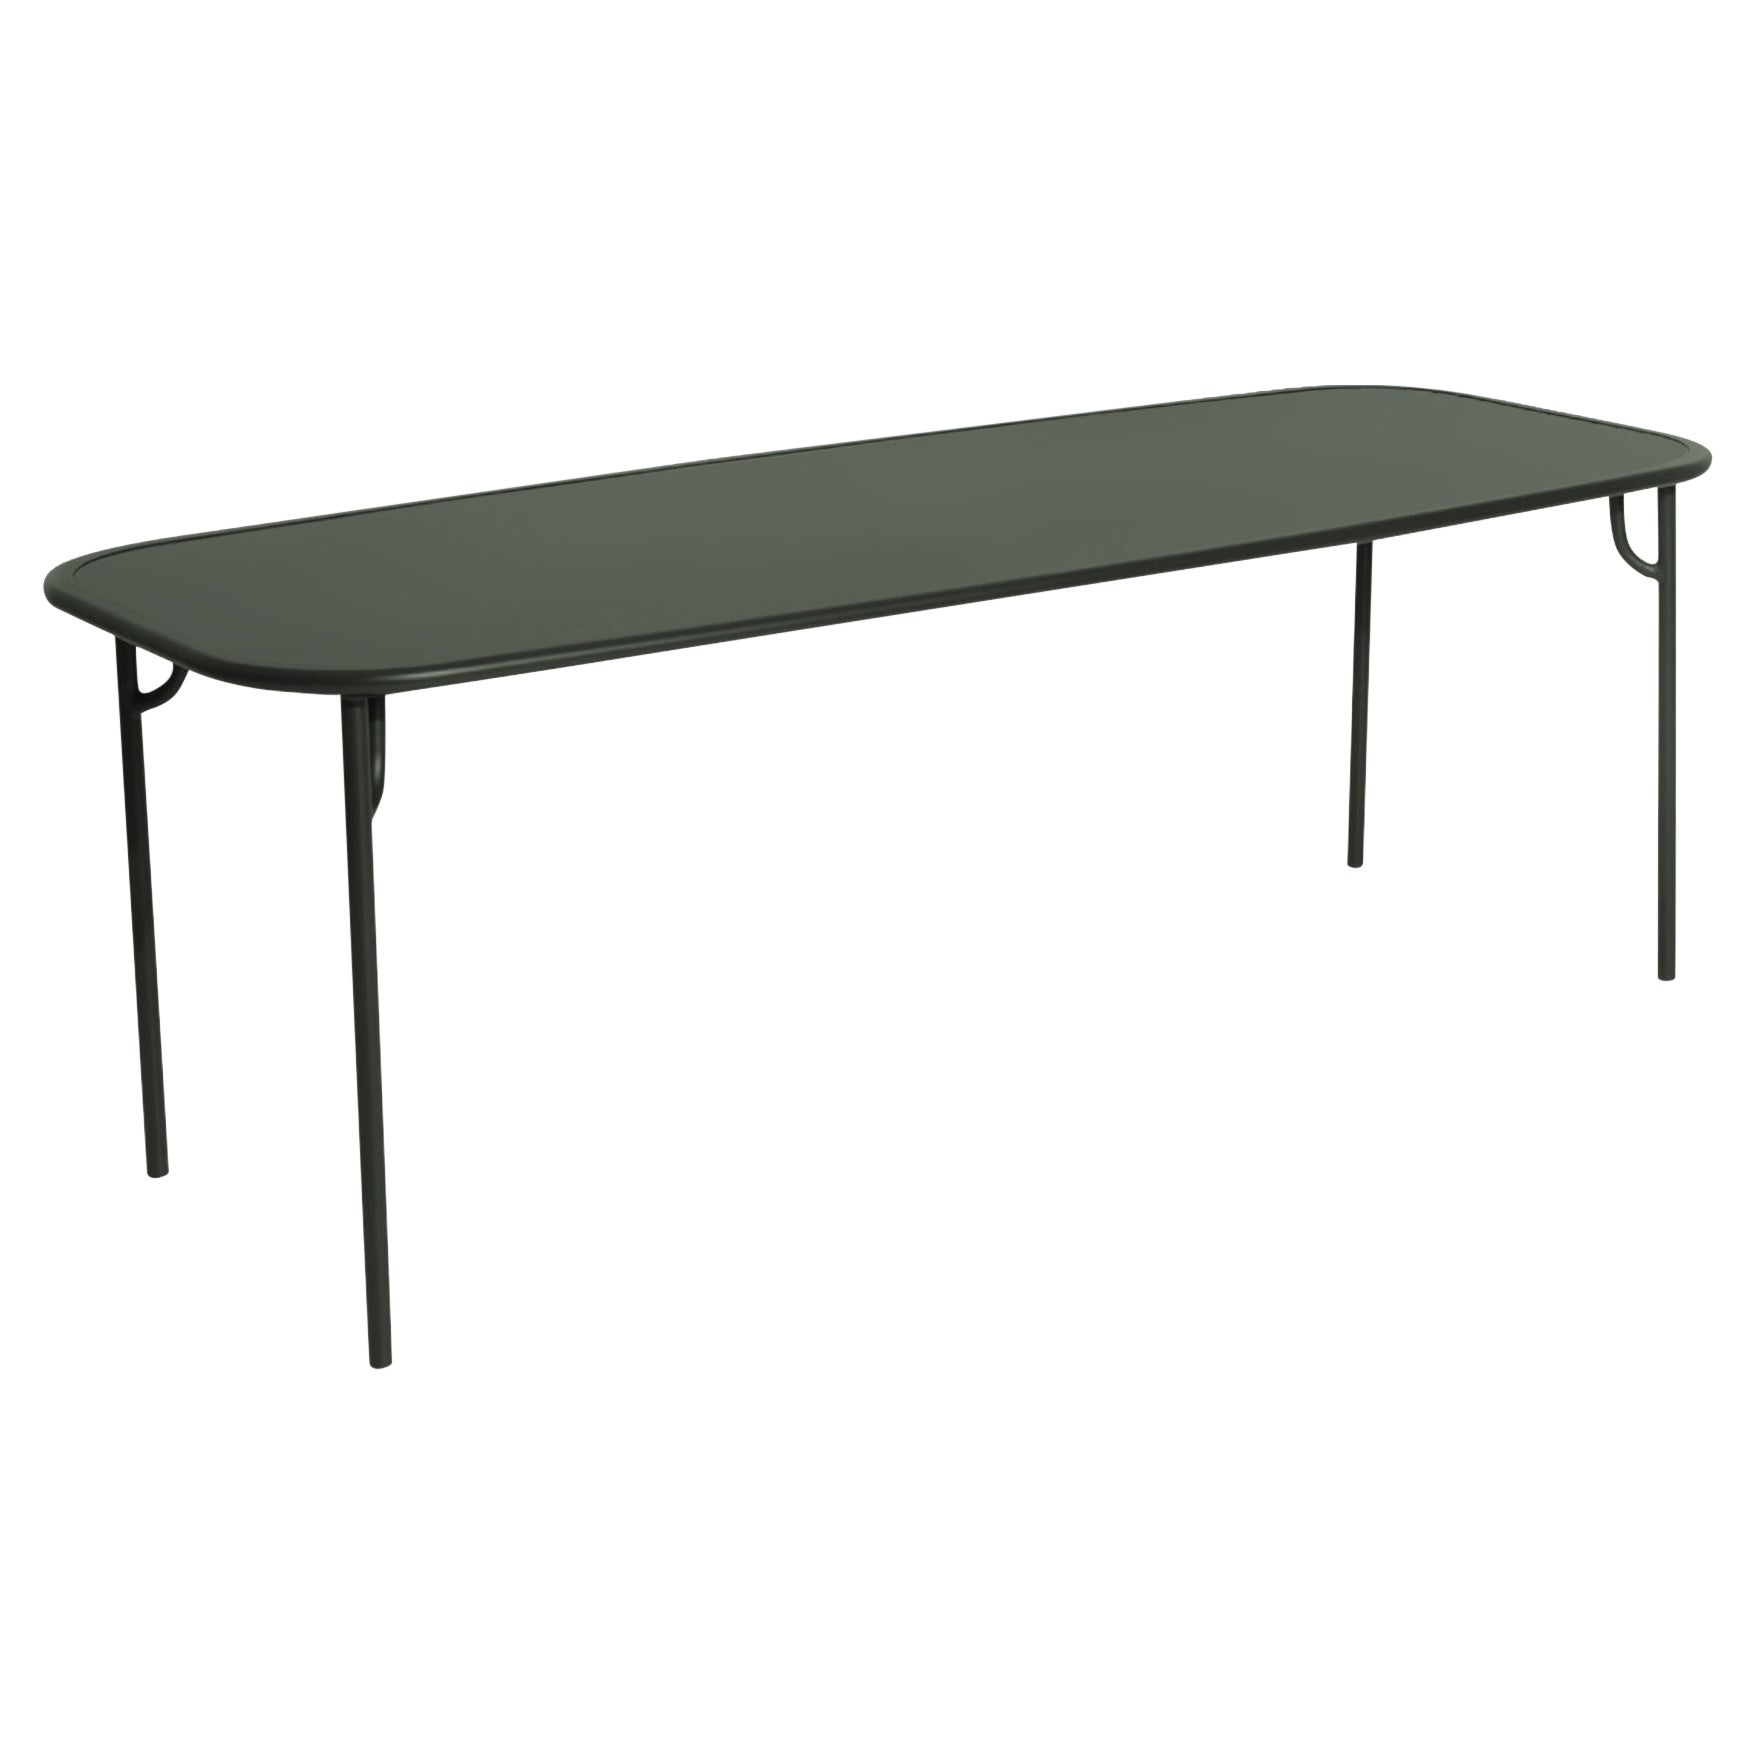 Petite Friture Week-End Large Plain Rectangular Dining Table in Glass Green For Sale